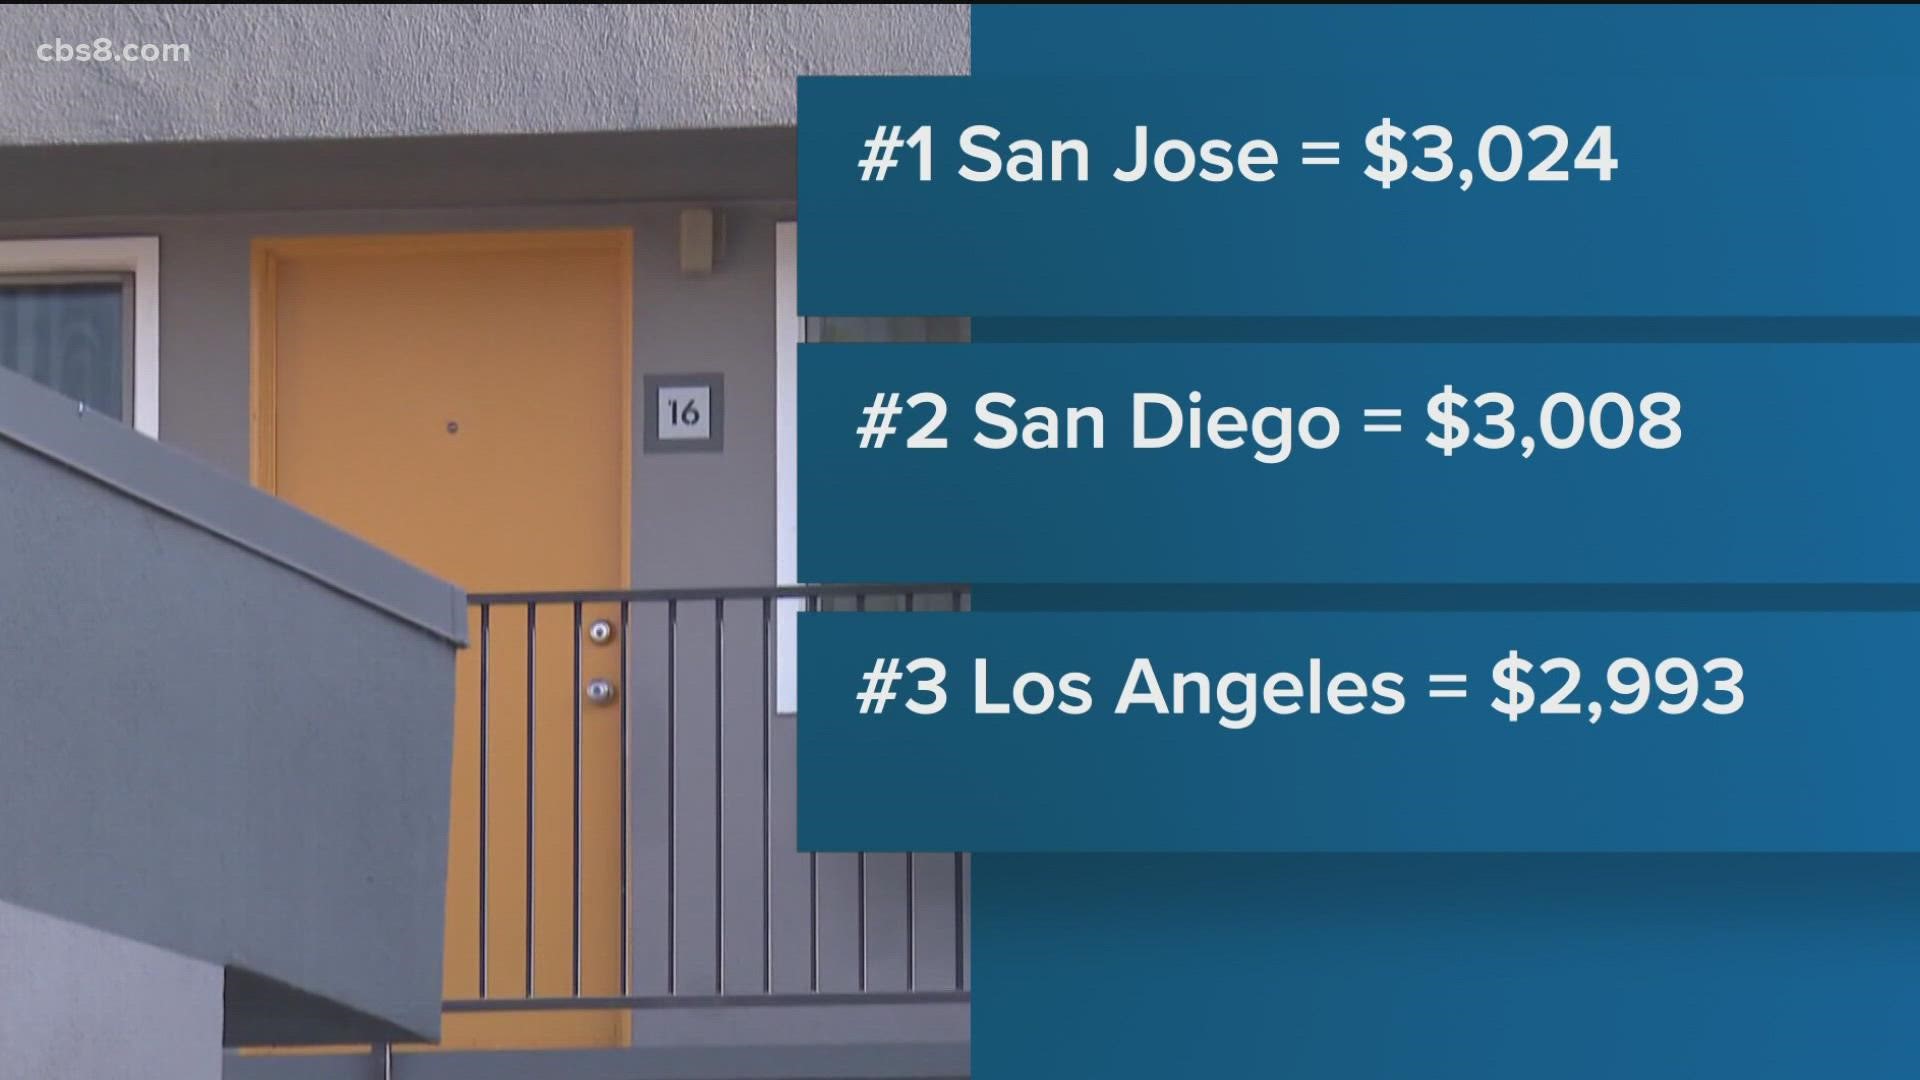 San Diegans are feeling the crunch as it becomes harder to maintain their standard of living.